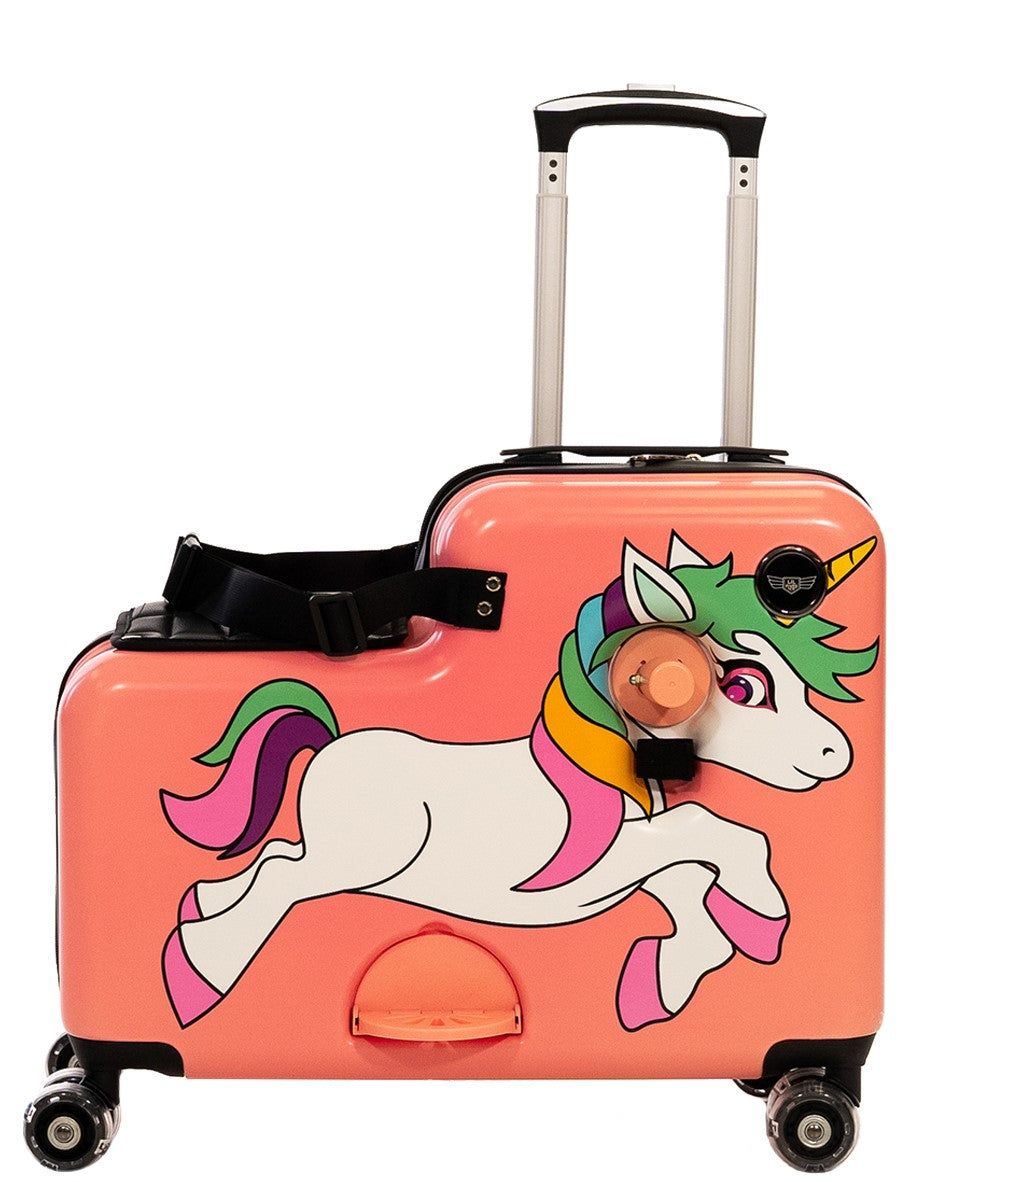 Kids Suitcase, Rolling Luggage with Wheels for Girls - Unicorn